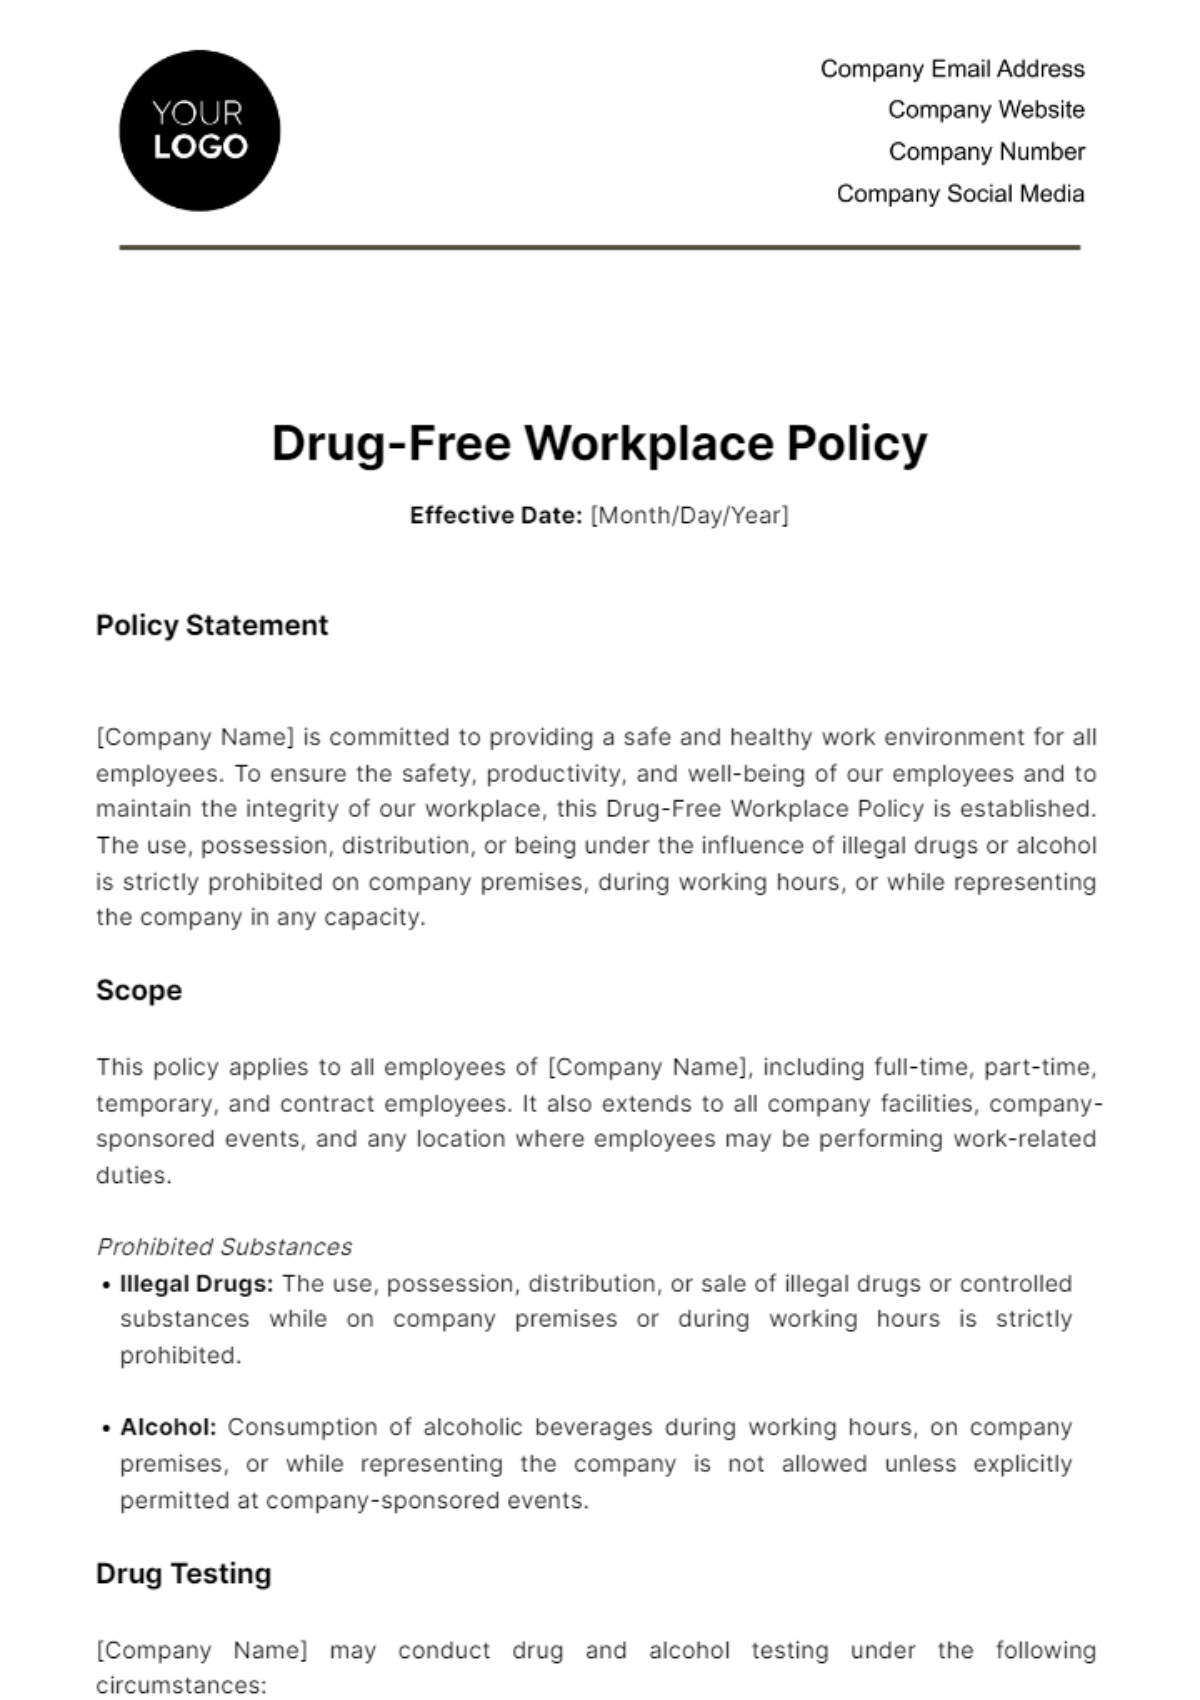 Drug-Free Workplace Policy HR Template